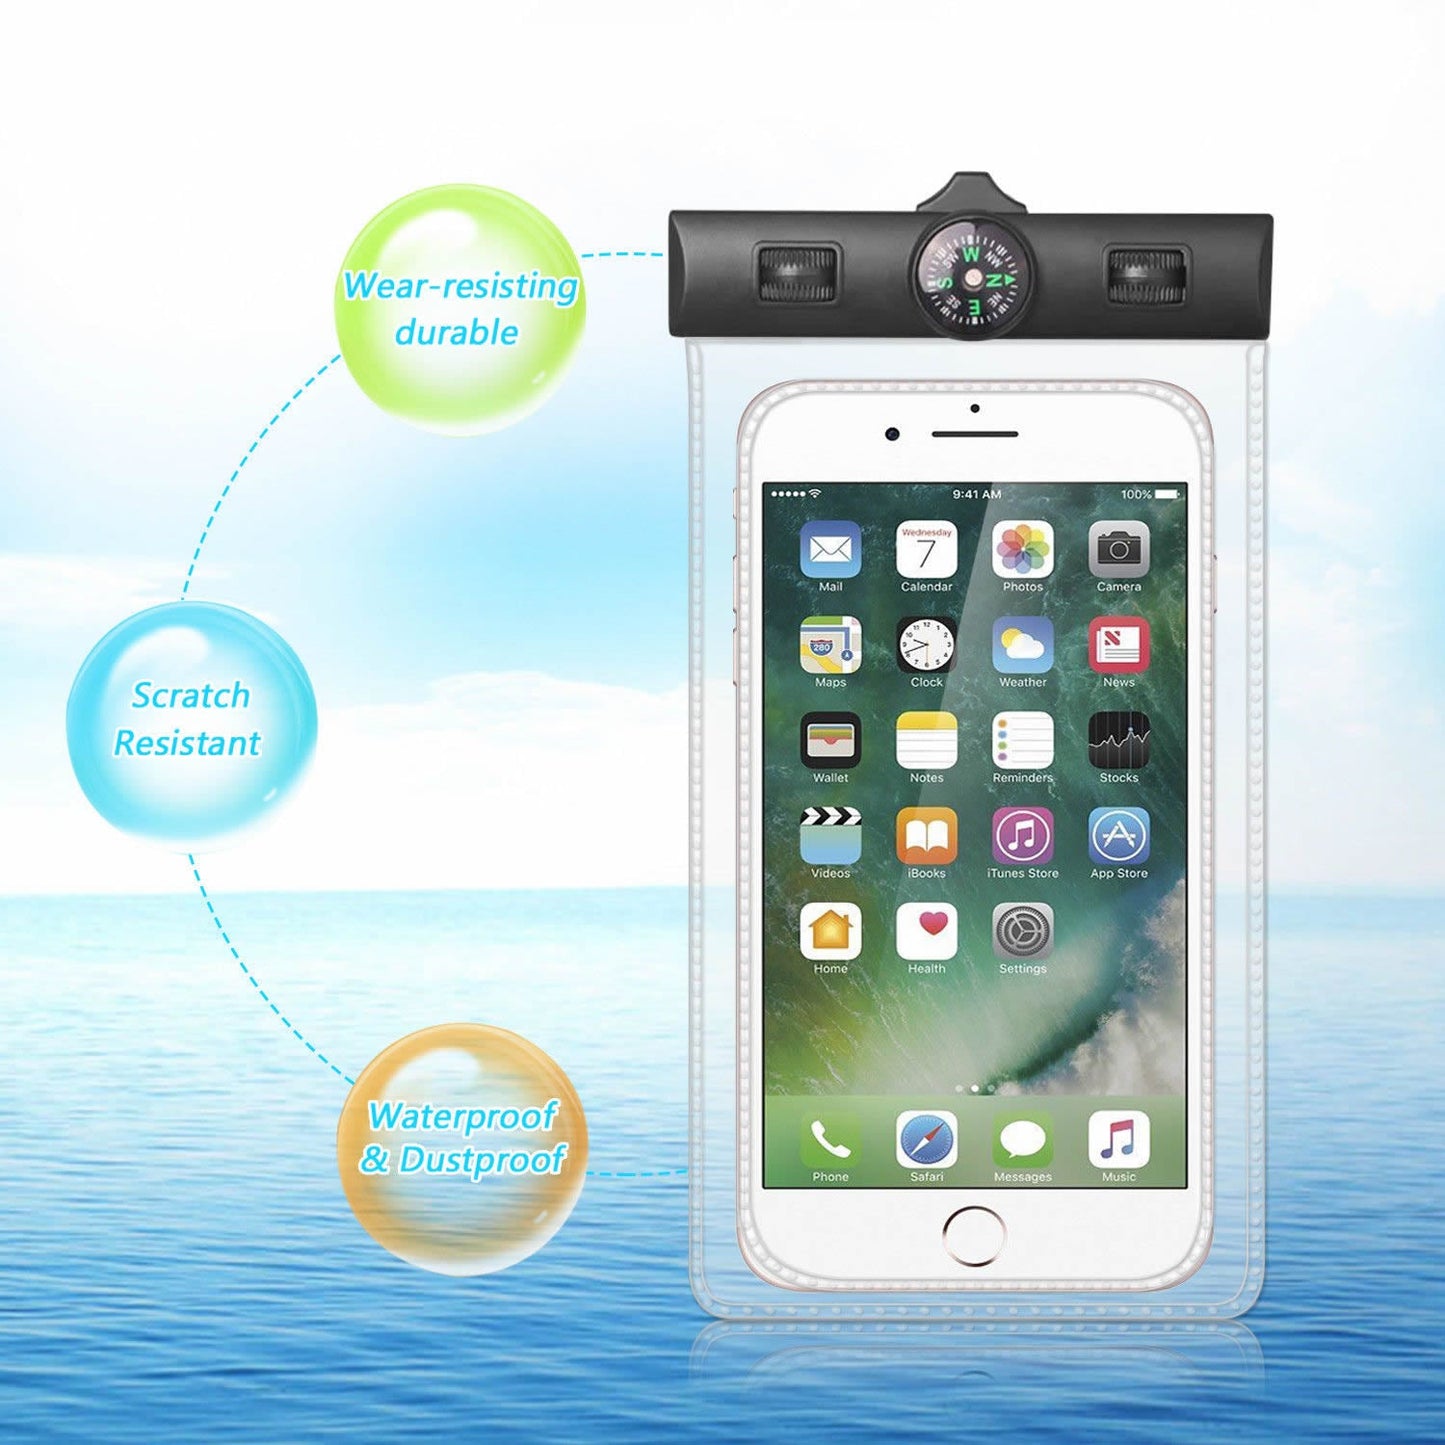 AQUA POUCH - Waterproof Pouch for your Smartphone and your Essentials by VistaShops